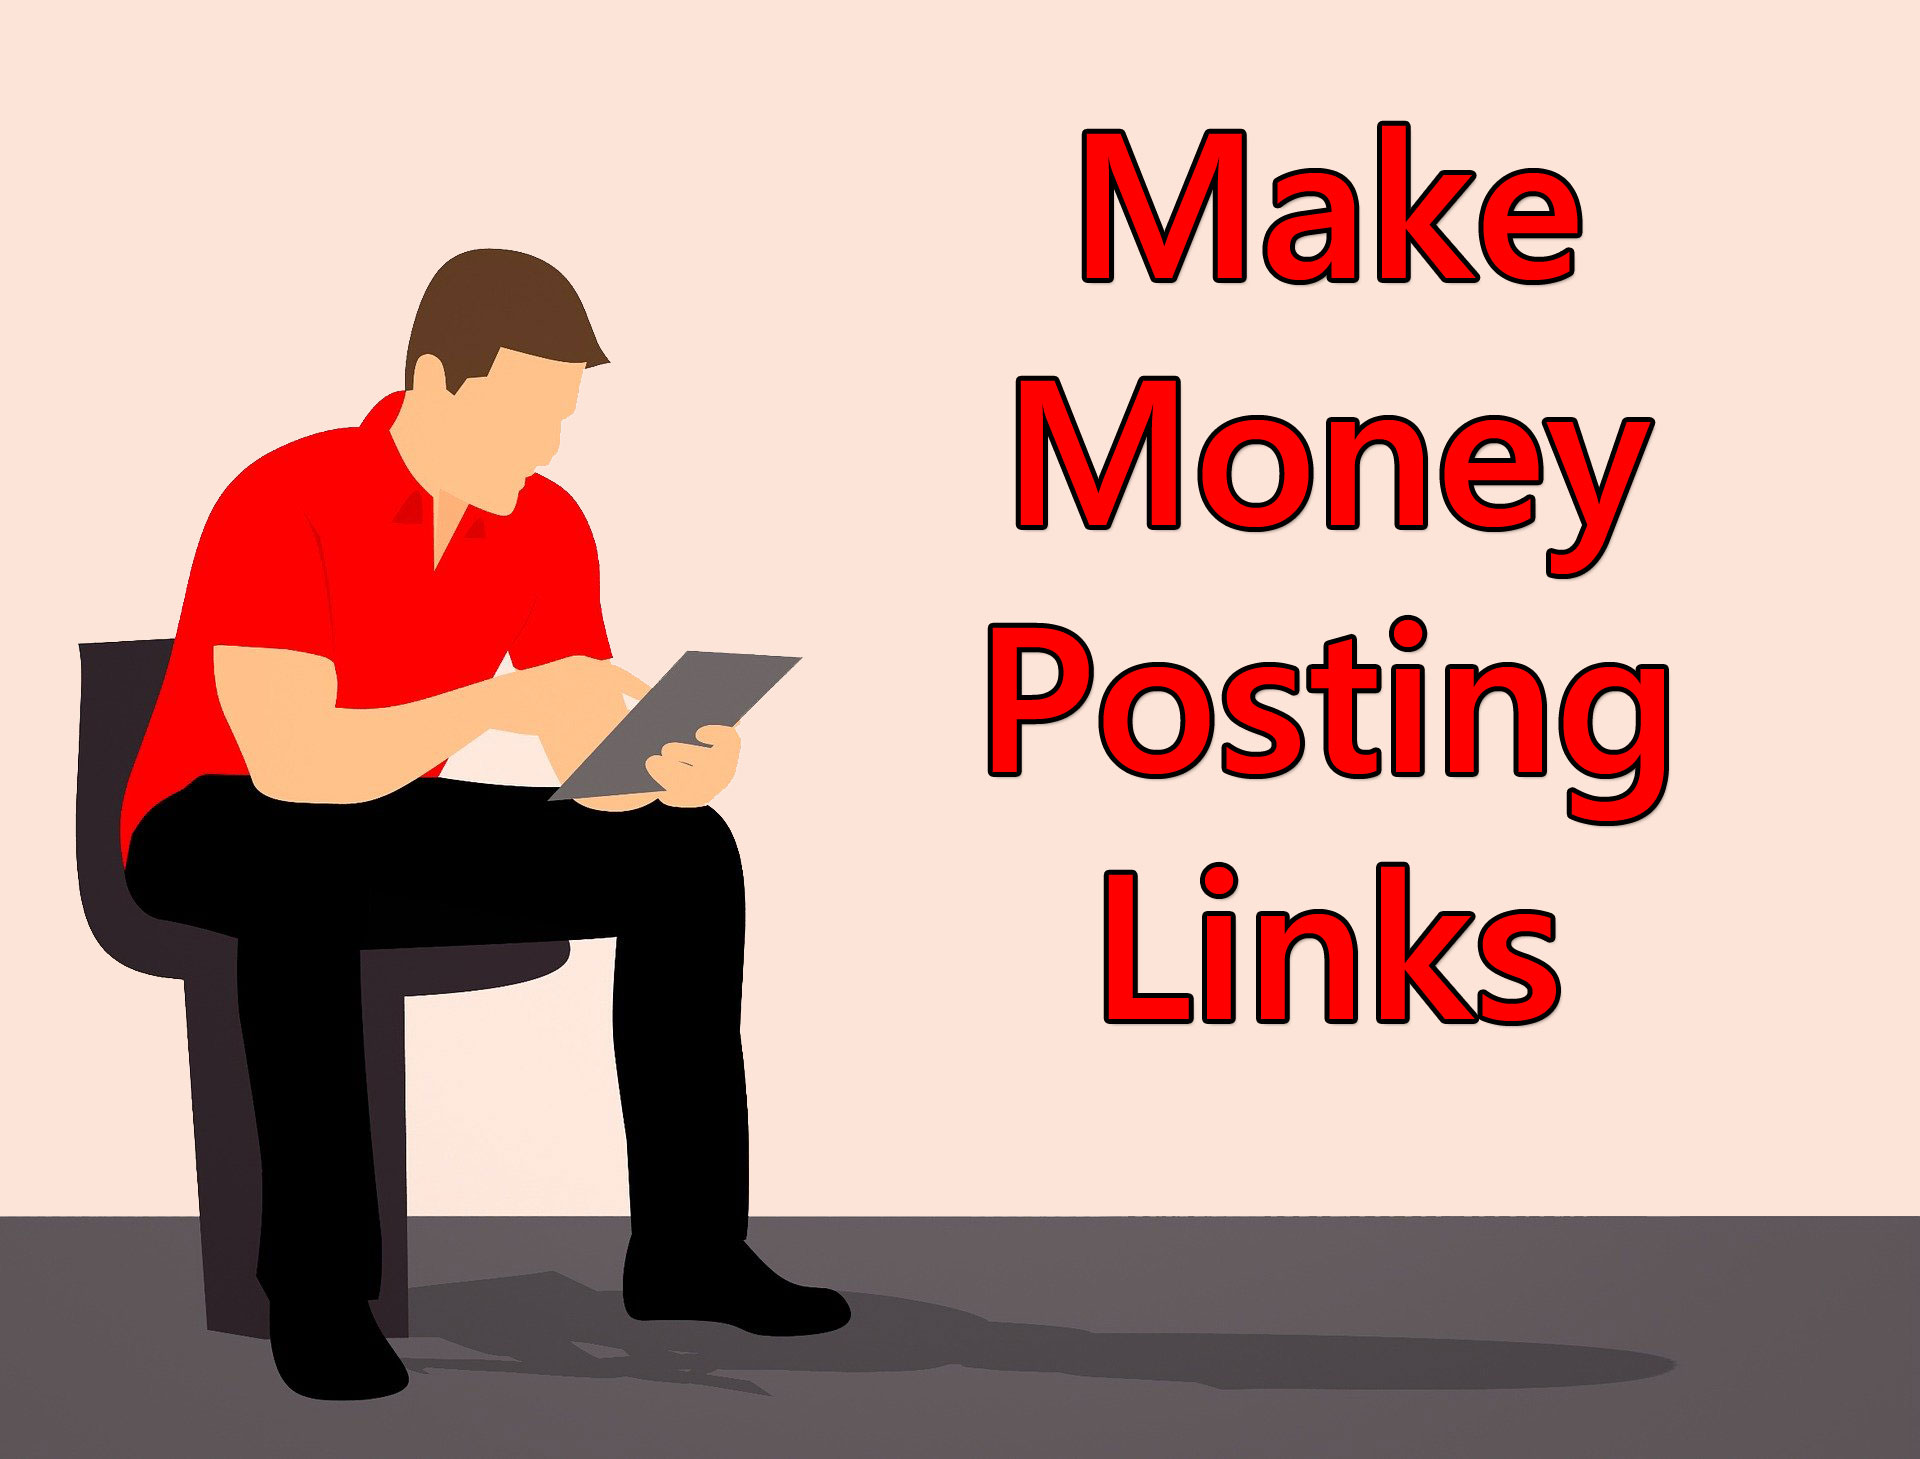 Can You Really Make Money Posting Links For Companies Onli